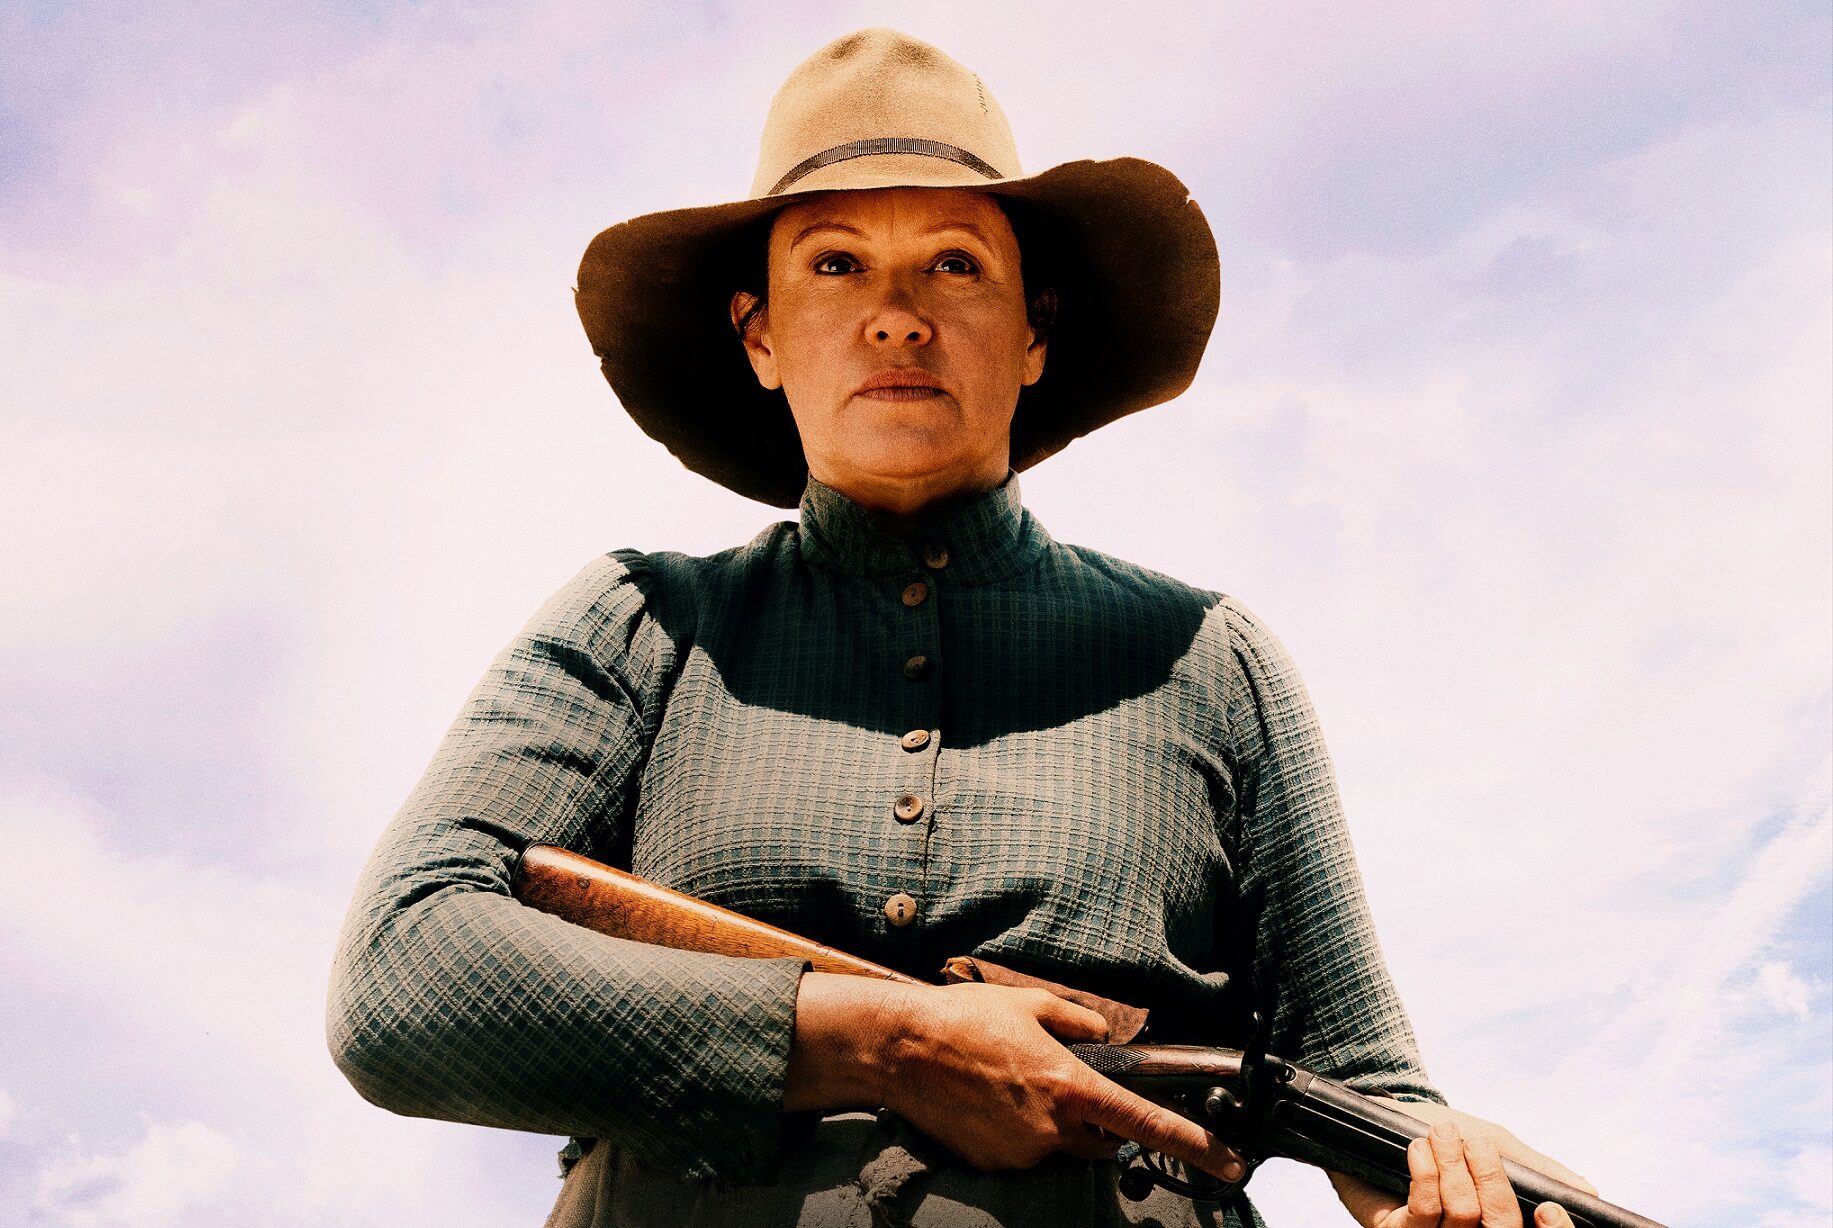 Trailer Watch: Leah Purcell Braves the Australian Outback in “The Legend of Molly Johnson”